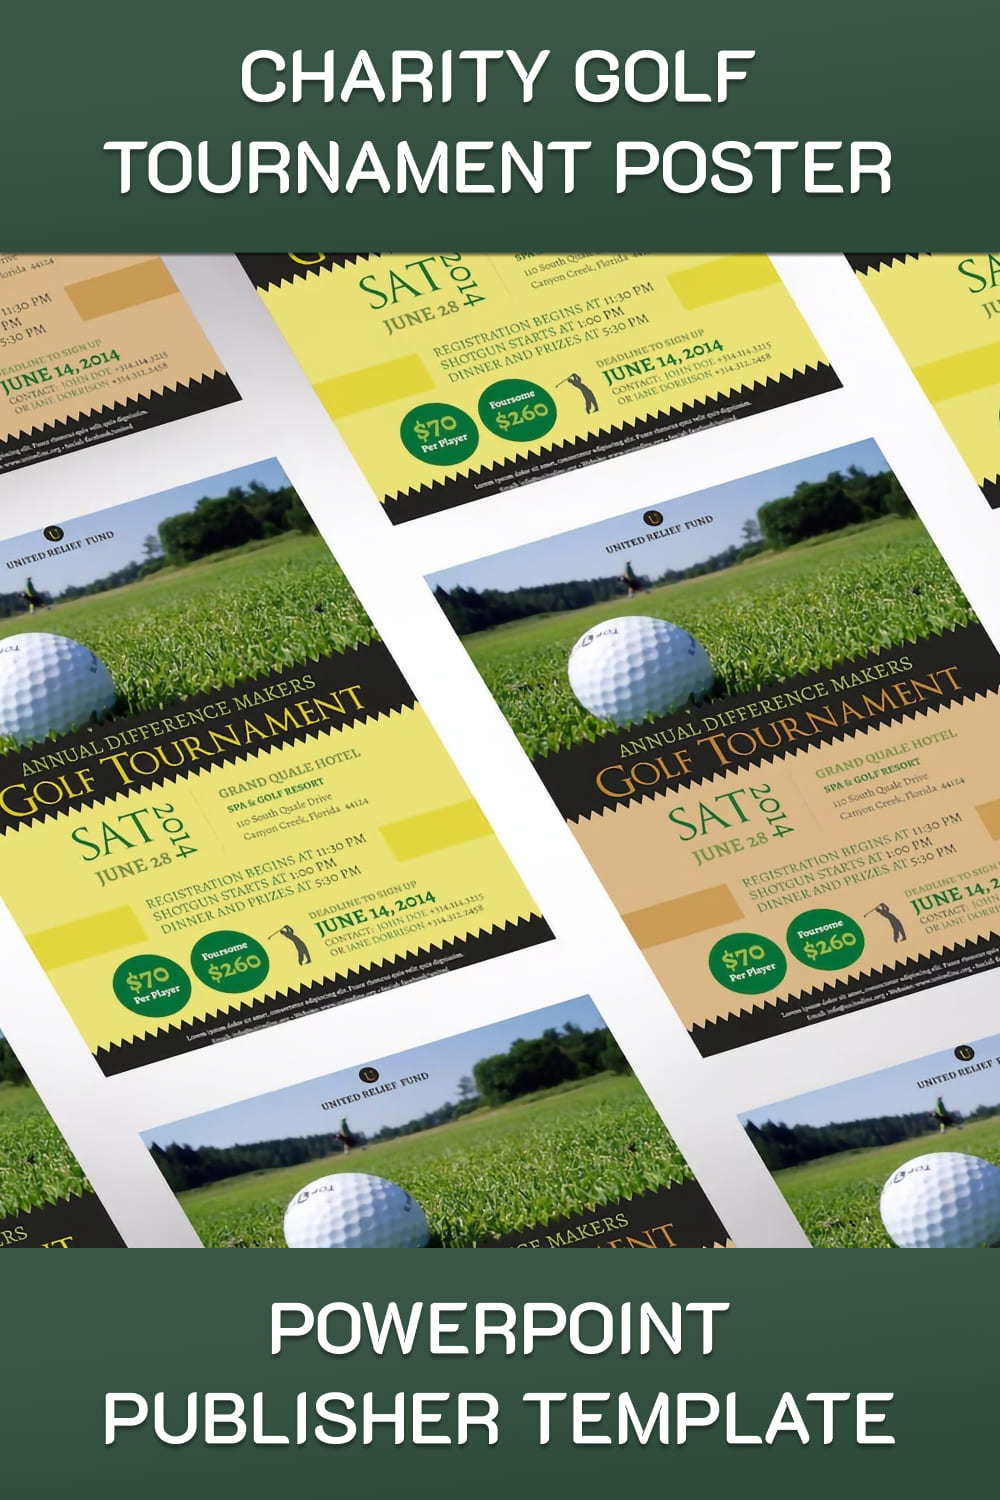 Charity Golf Tournament Poster PowerPoint Publisher Template | Editable Colors | Size 22"x28" - Pinterest.